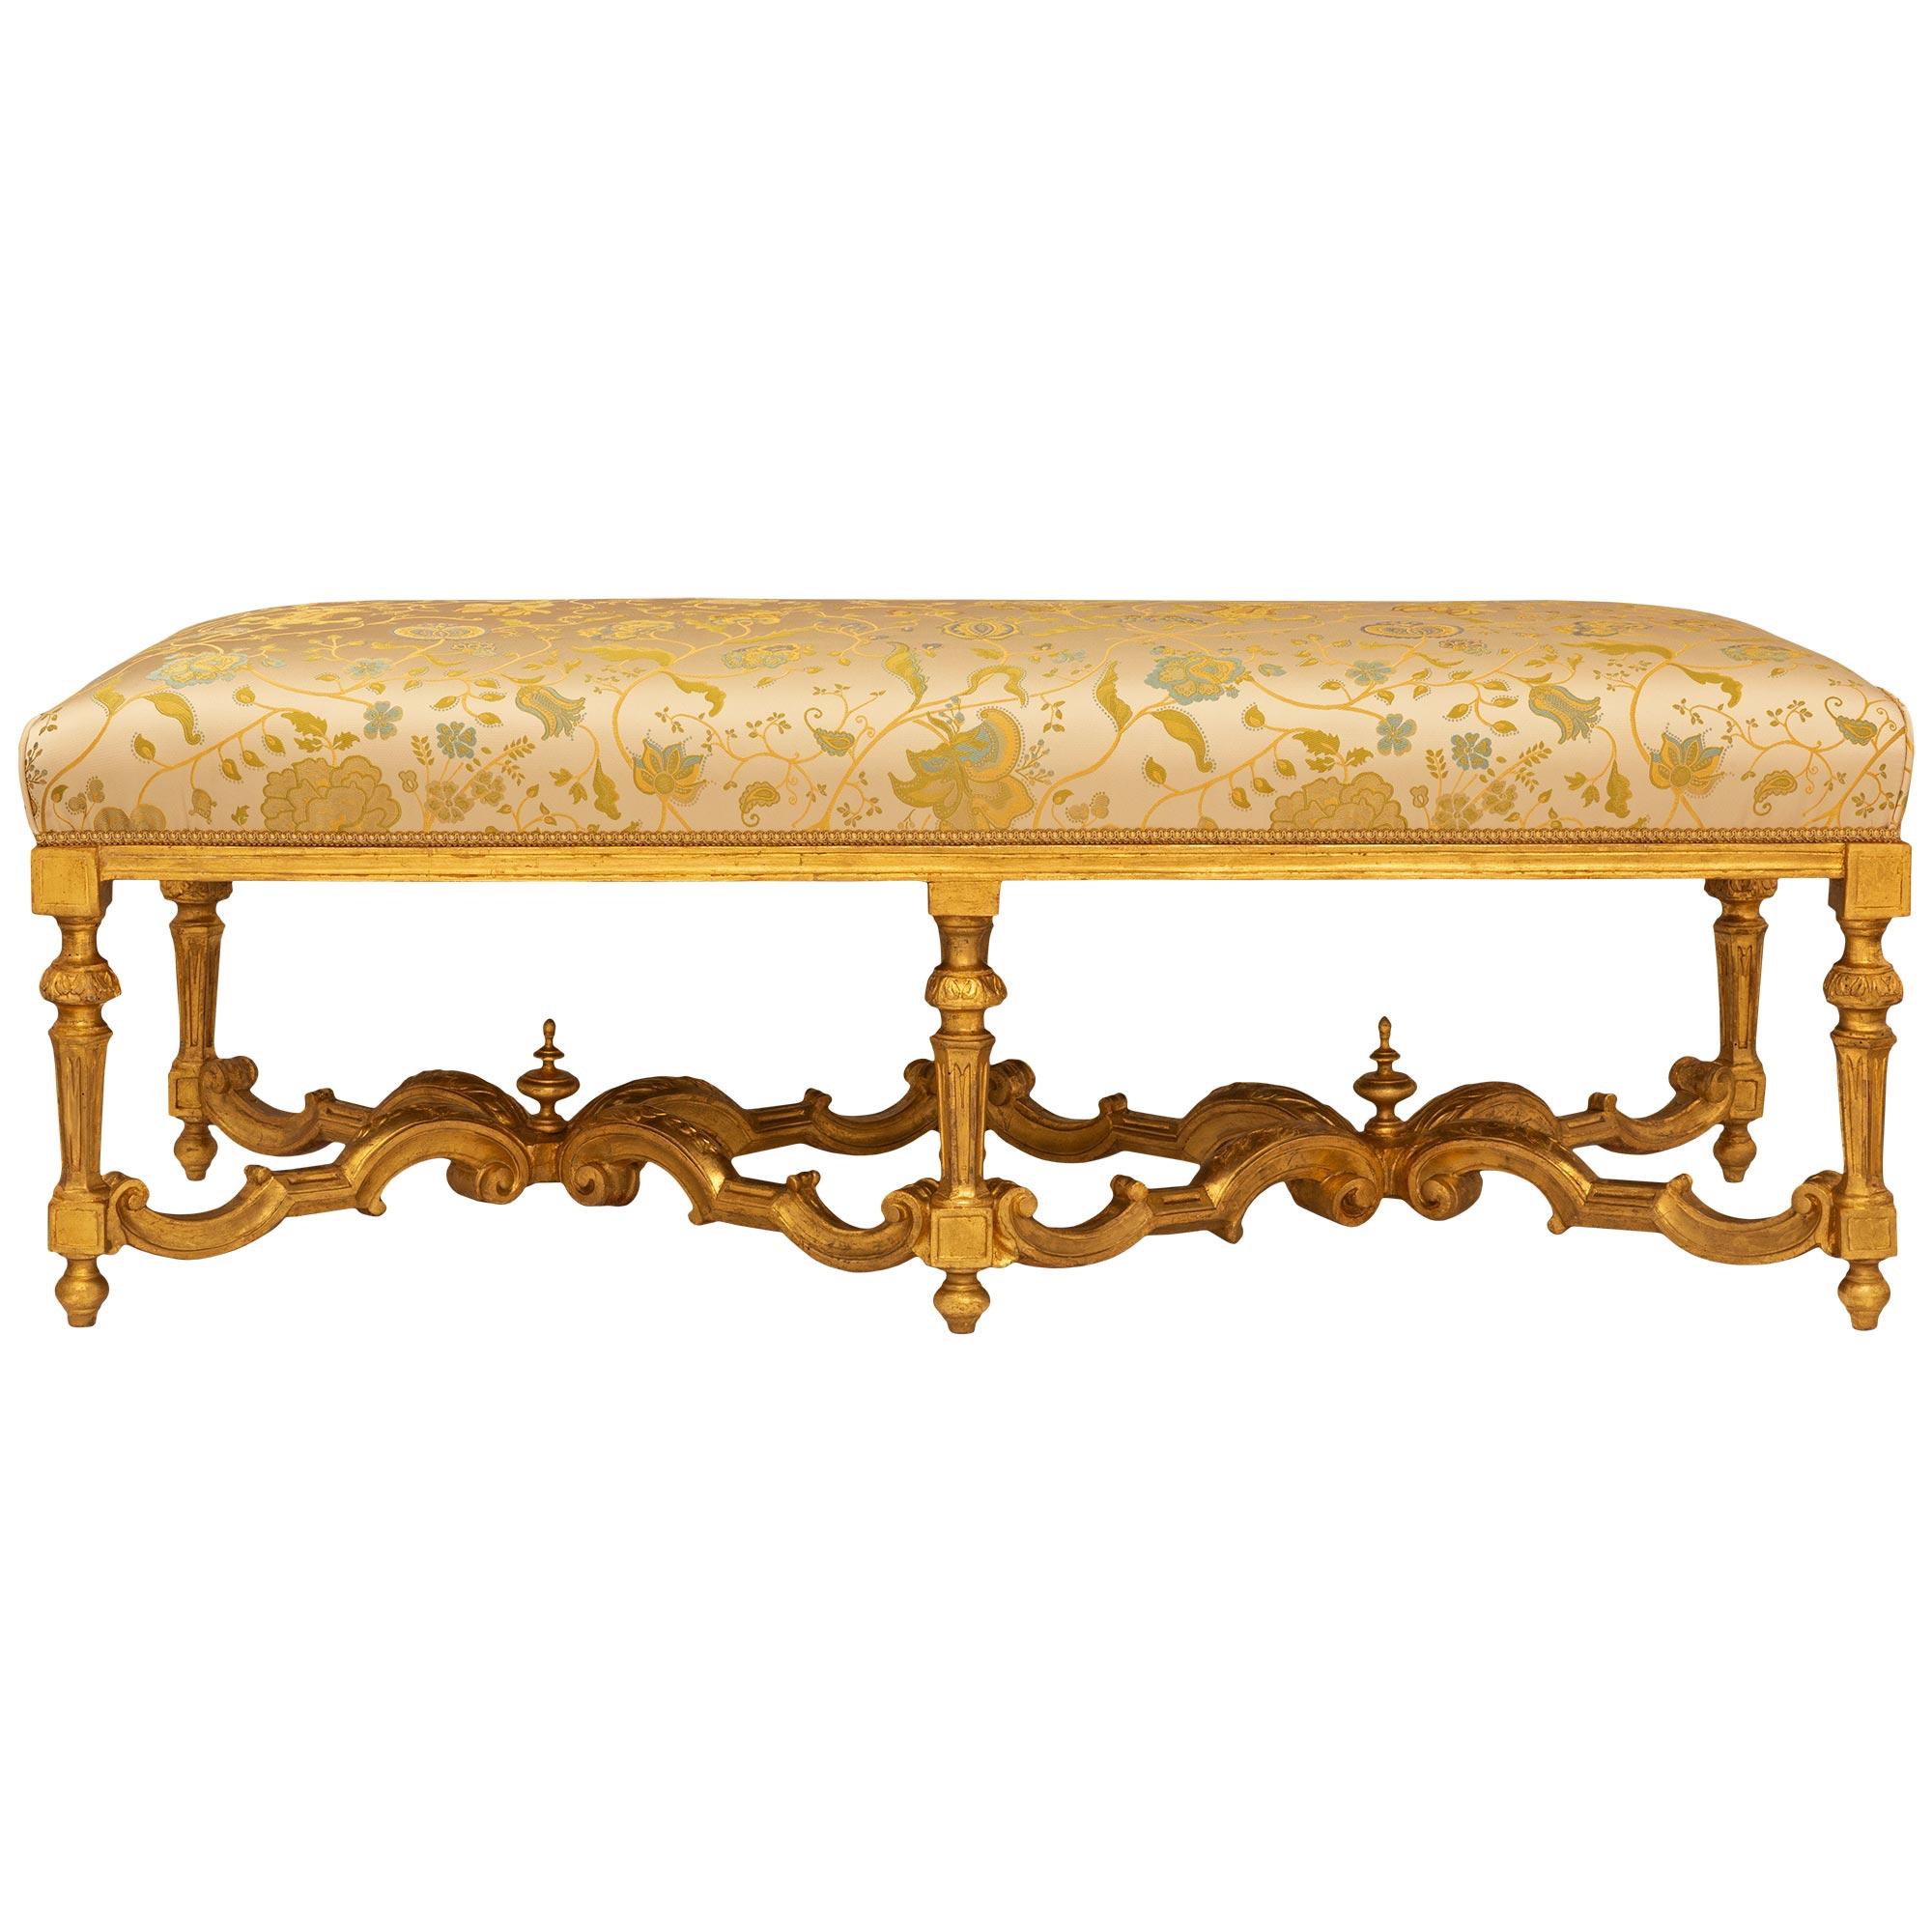 Italian Early 18th Century Louis XIV Period Giltwood Bench For Sale